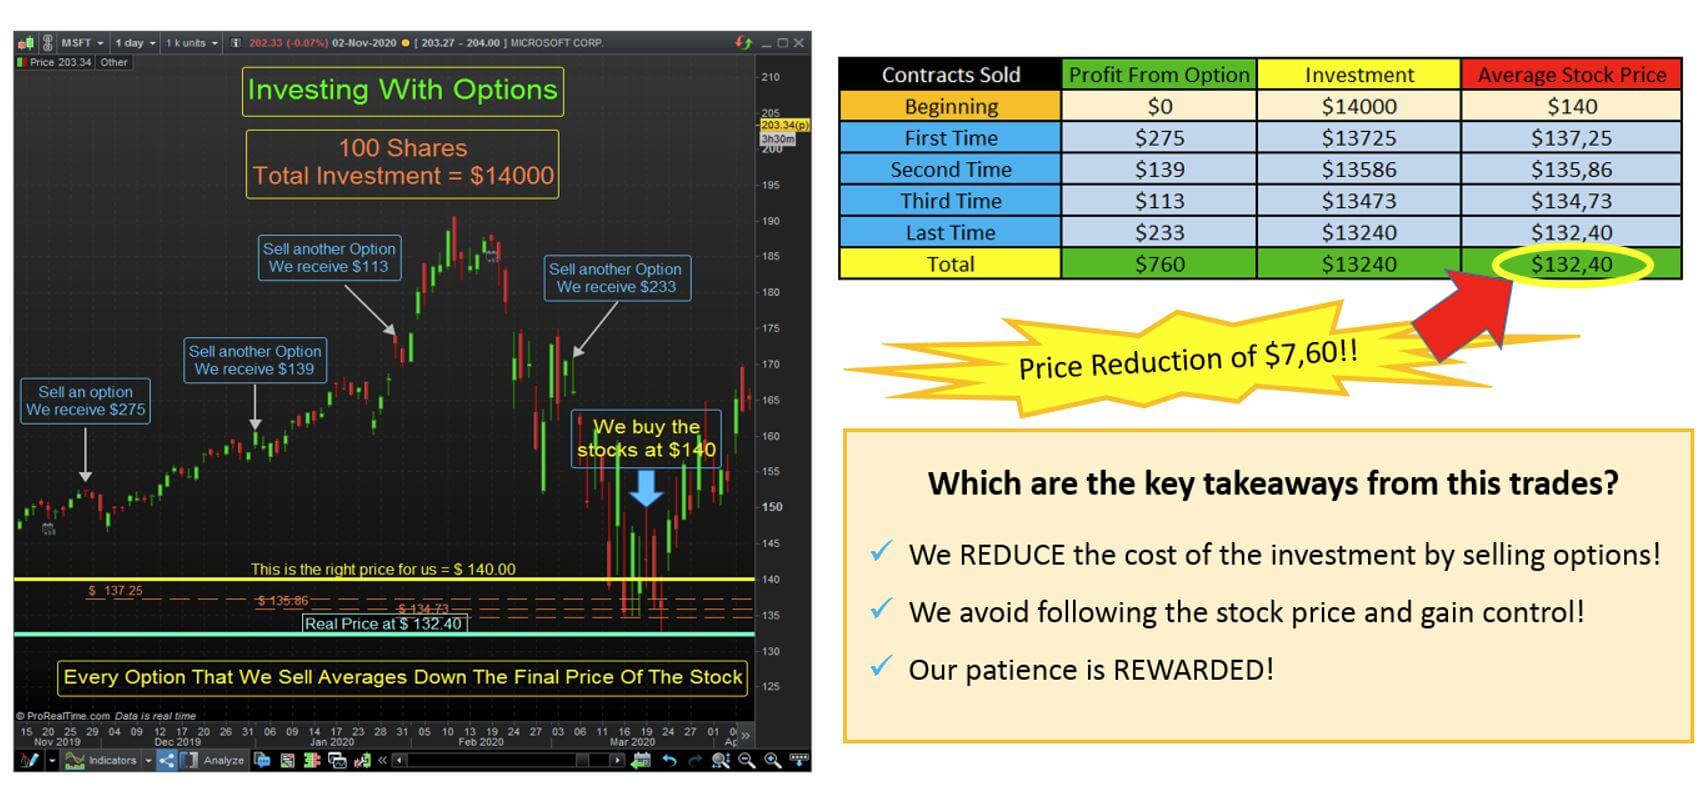 is option trading worth it as an investor